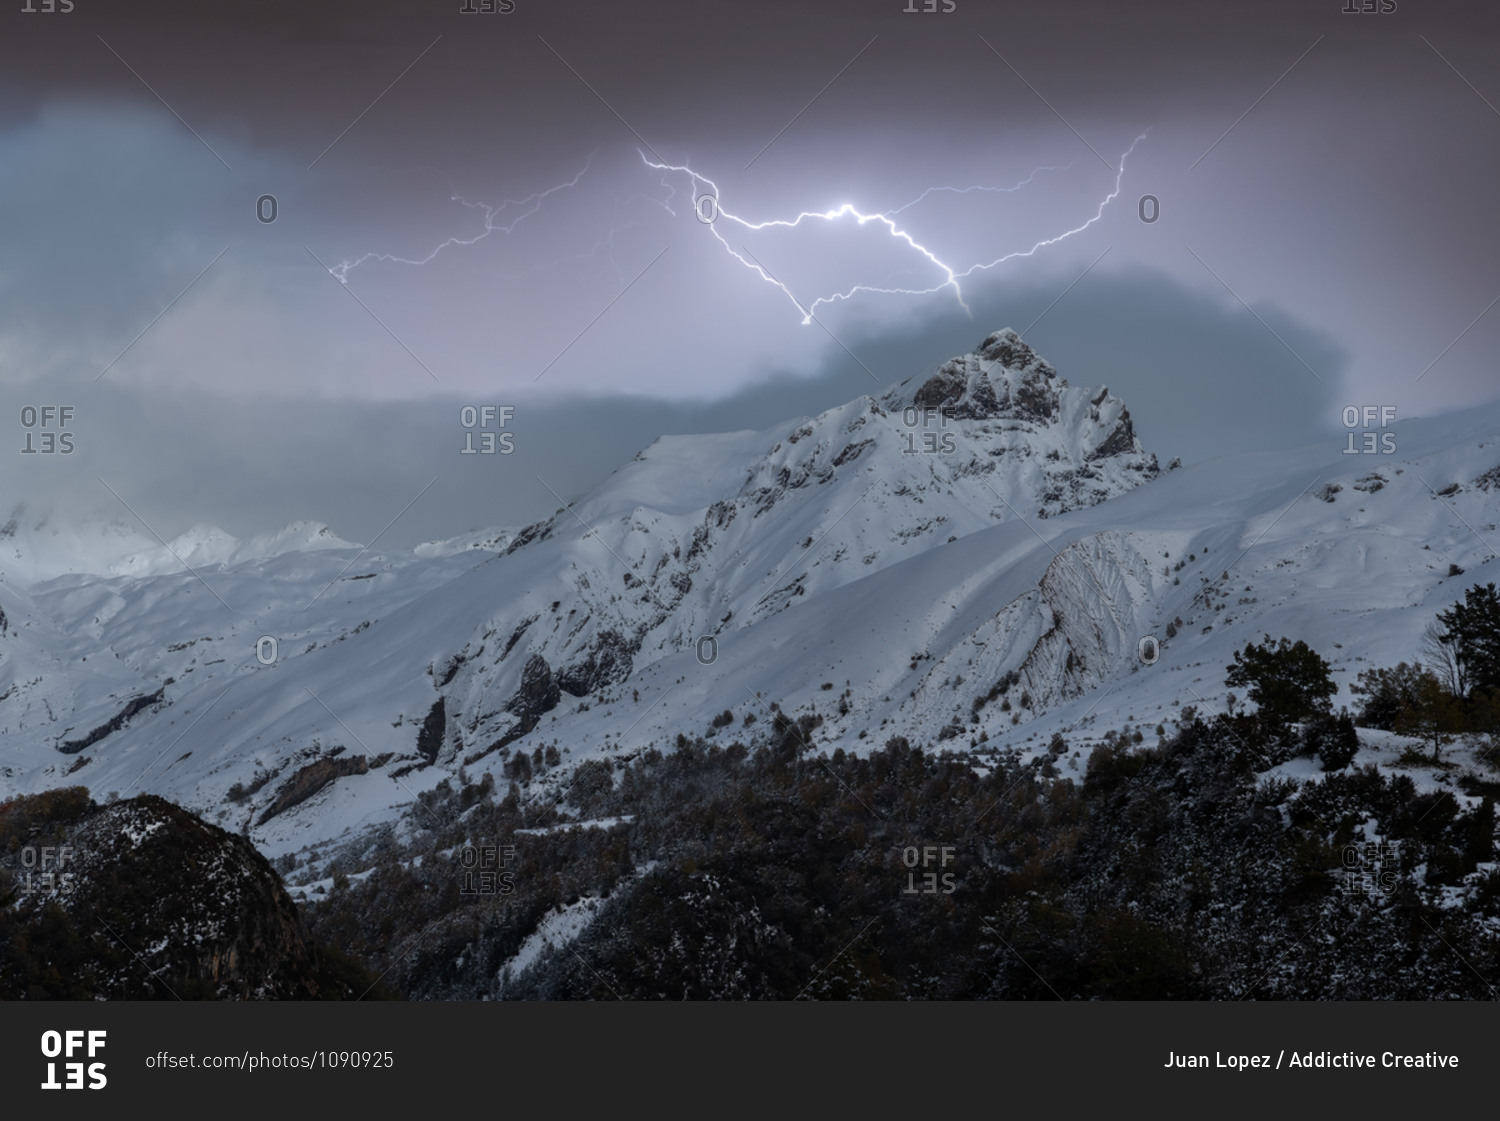 Scenery of mountain range covered with snow under thunderstorm sky with bright lightnings in winter